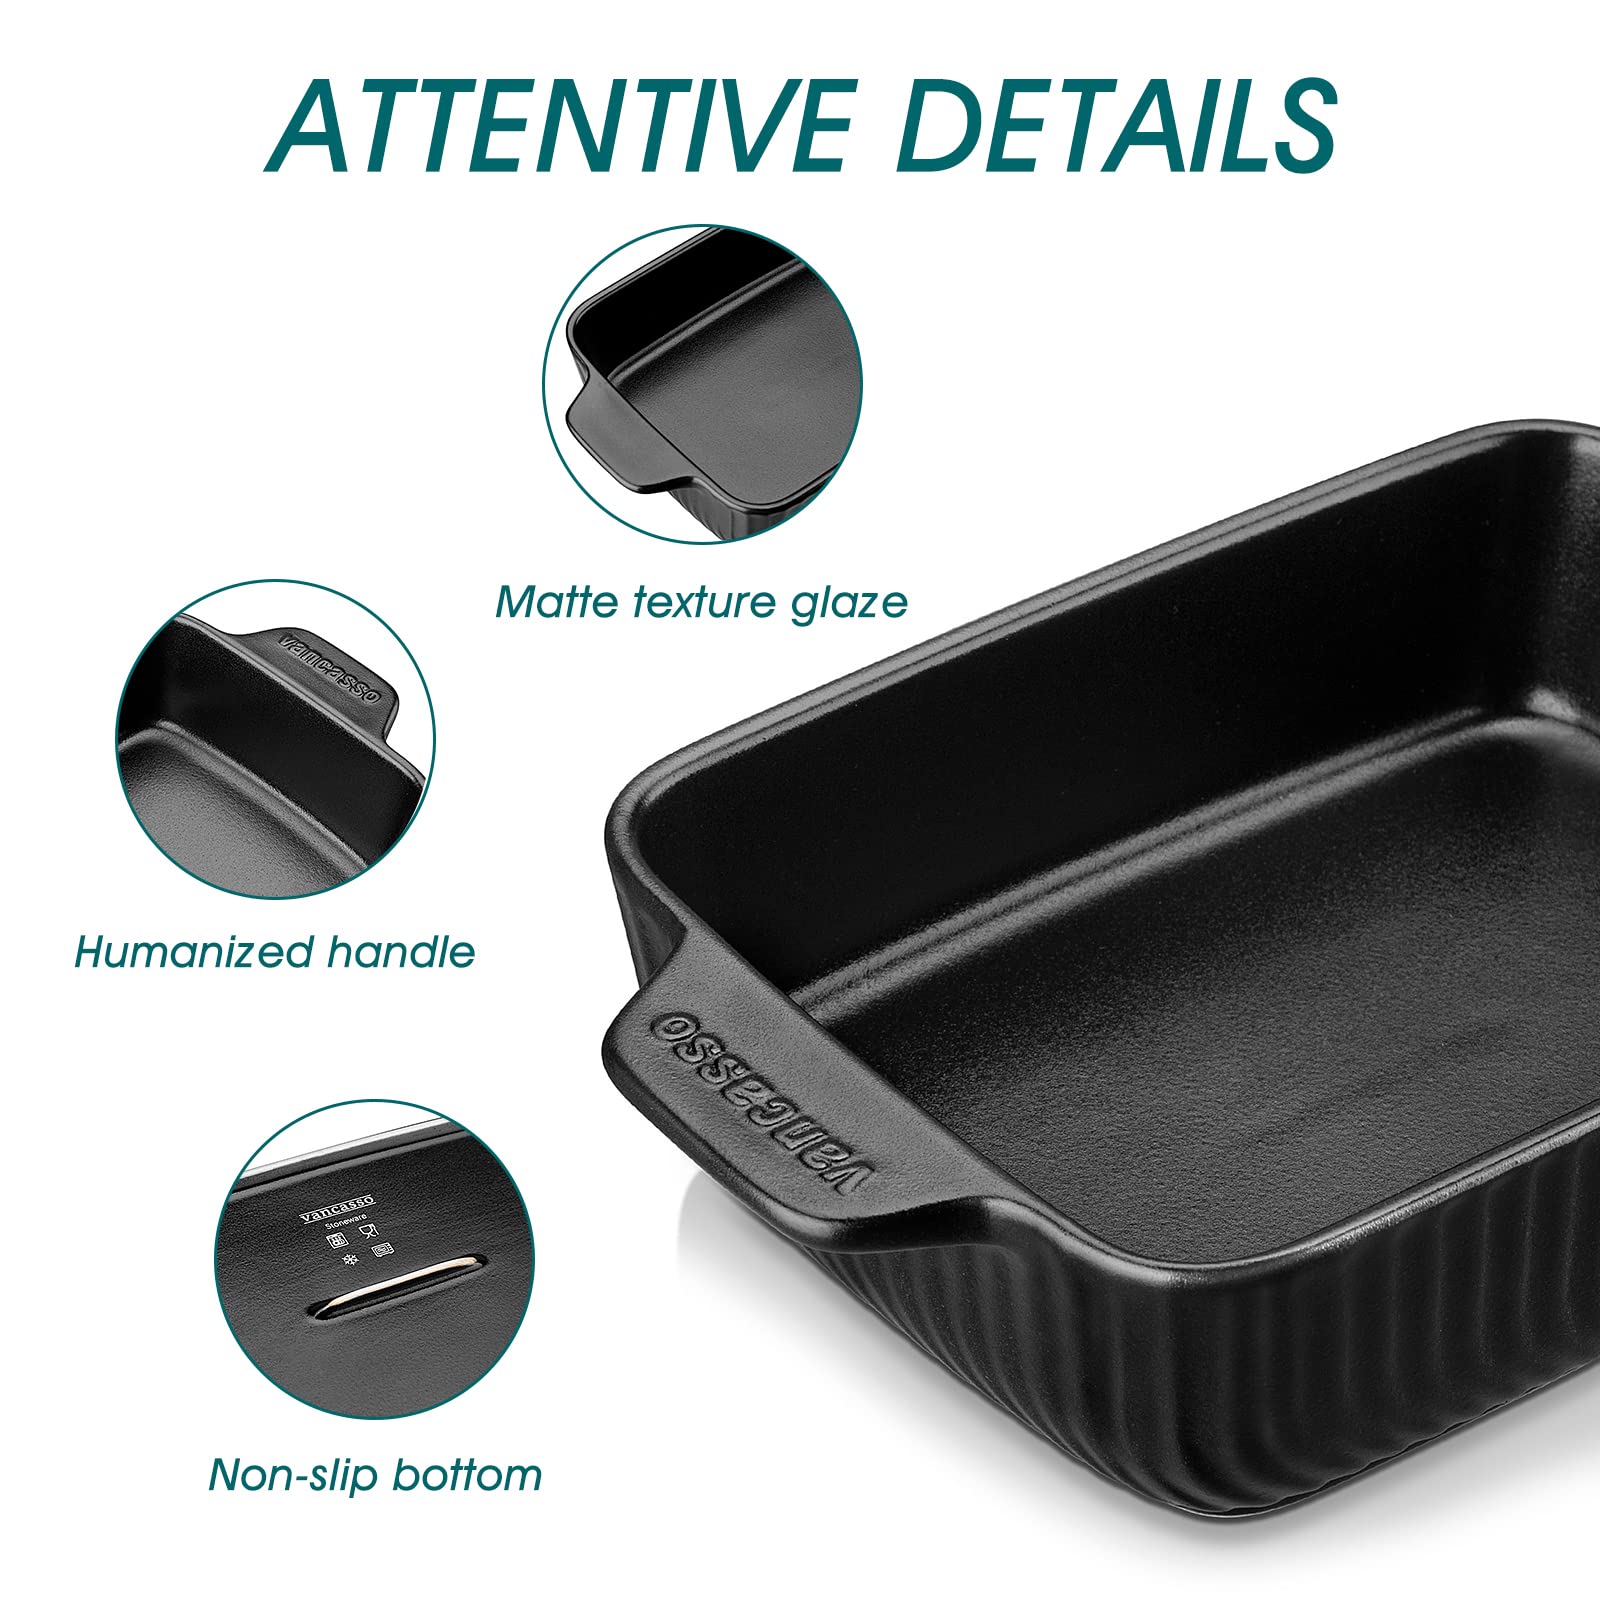 vancasso Forte Baking Dishes, Casserole Dishes for Oven, Rectangular Baking Dish, Lasagna Pan Deep with Handles, Stoneware Bakeware Set for Cooking, Kitchen (3 PCS, Black)